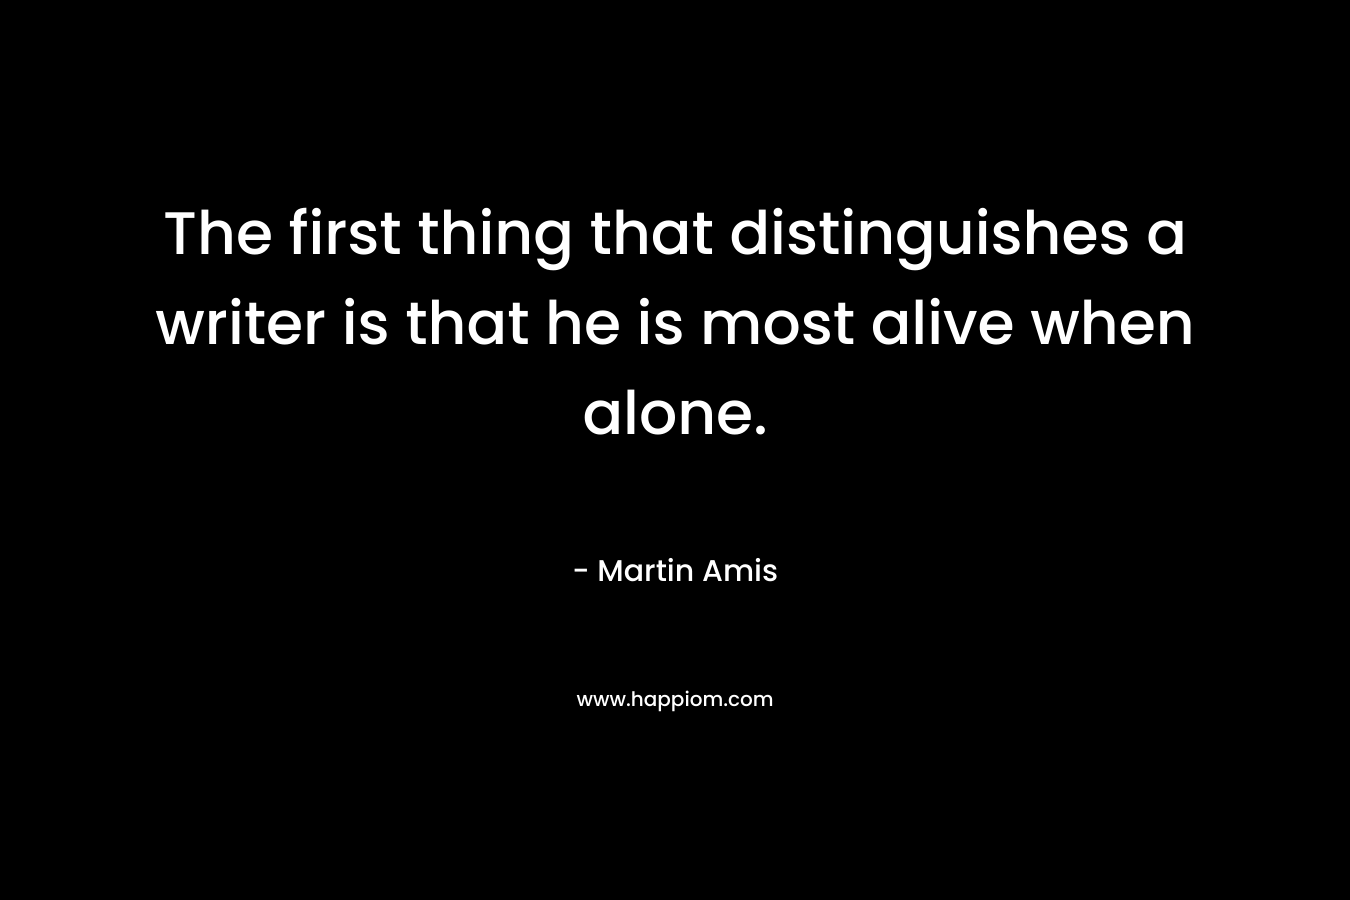 The first thing that distinguishes a writer is that he is most alive when alone. – Martin Amis